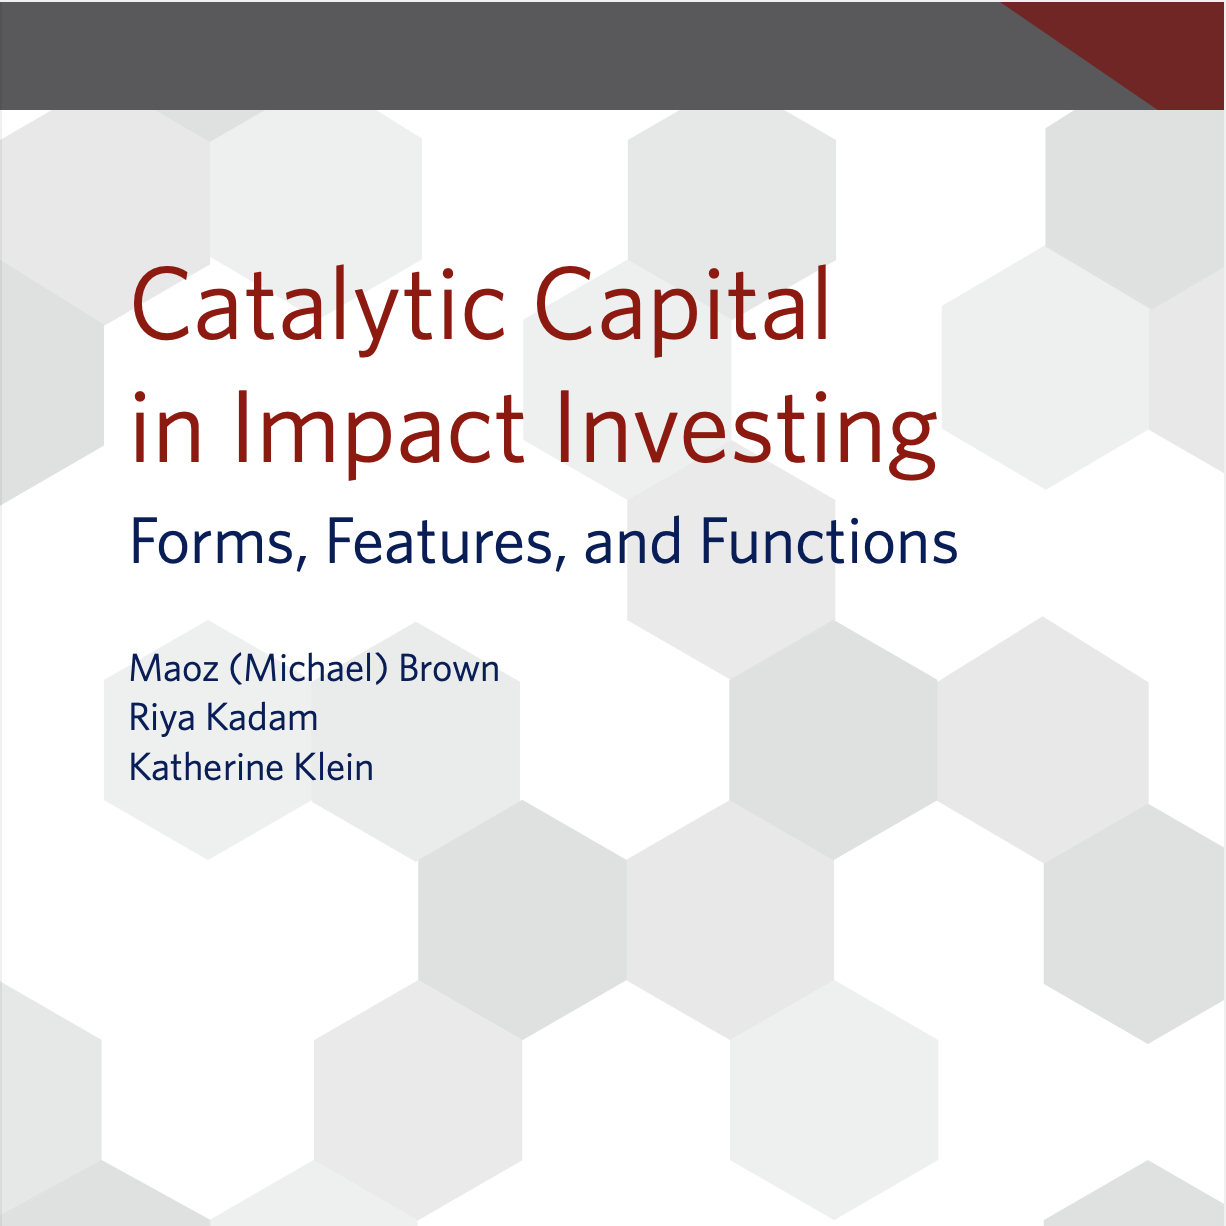 Cover page of a report that says "Catalytic Capital in Impact Investing Forms, Features, and Functions". The listed authors are Maoz (Michael) Brown, Riya Kadam, and Katherine Klein.